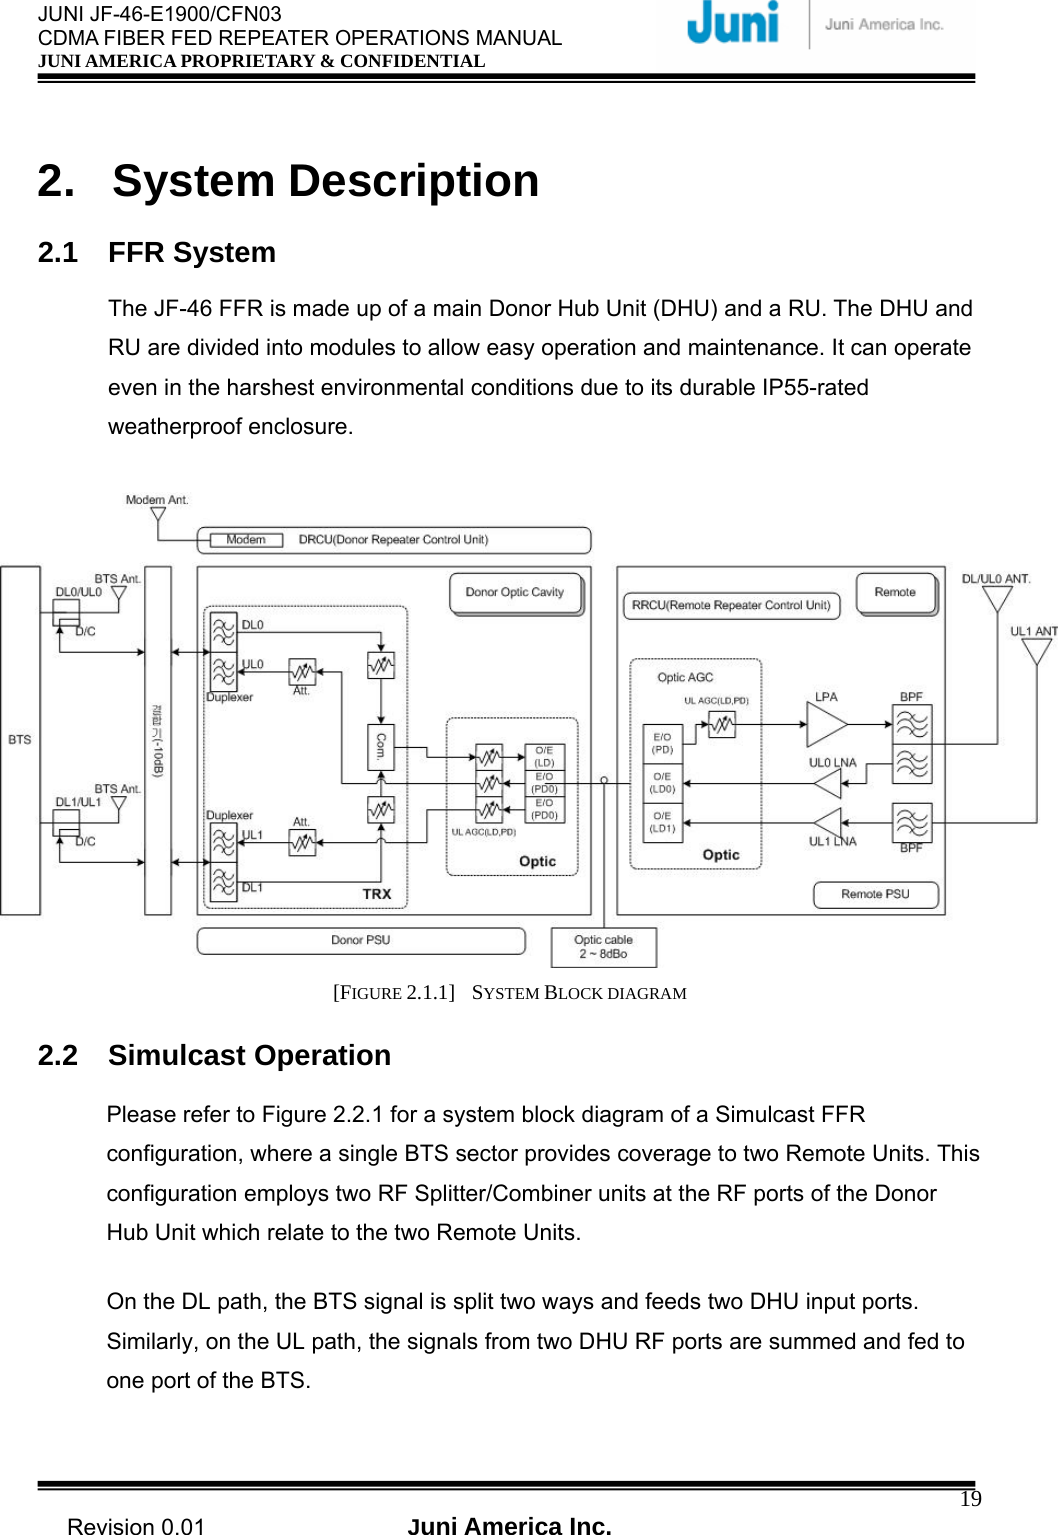  JUNI JF-46-E1900/CFN03 CDMA FIBER FED REPEATER OPERATIONS MANUAL JUNI AMERICA PROPRIETARY &amp; CONFIDENTIAL                                   Revision 0.01  Juni America Inc.  19 2. System Description  2.1 FFR System  The JF-46 FFR is made up of a main Donor Hub Unit (DHU) and a RU. The DHU and RU are divided into modules to allow easy operation and maintenance. It can operate even in the harshest environmental conditions due to its durable IP55-rated weatherproof enclosure.   [FIGURE 2.1.1]  SYSTEM BLOCK DIAGRAM  2.2 Simulcast Operation Please refer to Figure 2.2.1 for a system block diagram of a Simulcast FFR configuration, where a single BTS sector provides coverage to two Remote Units. This configuration employs two RF Splitter/Combiner units at the RF ports of the Donor Hub Unit which relate to the two Remote Units. On the DL path, the BTS signal is split two ways and feeds two DHU input ports. Similarly, on the UL path, the signals from two DHU RF ports are summed and fed to one port of the BTS. 